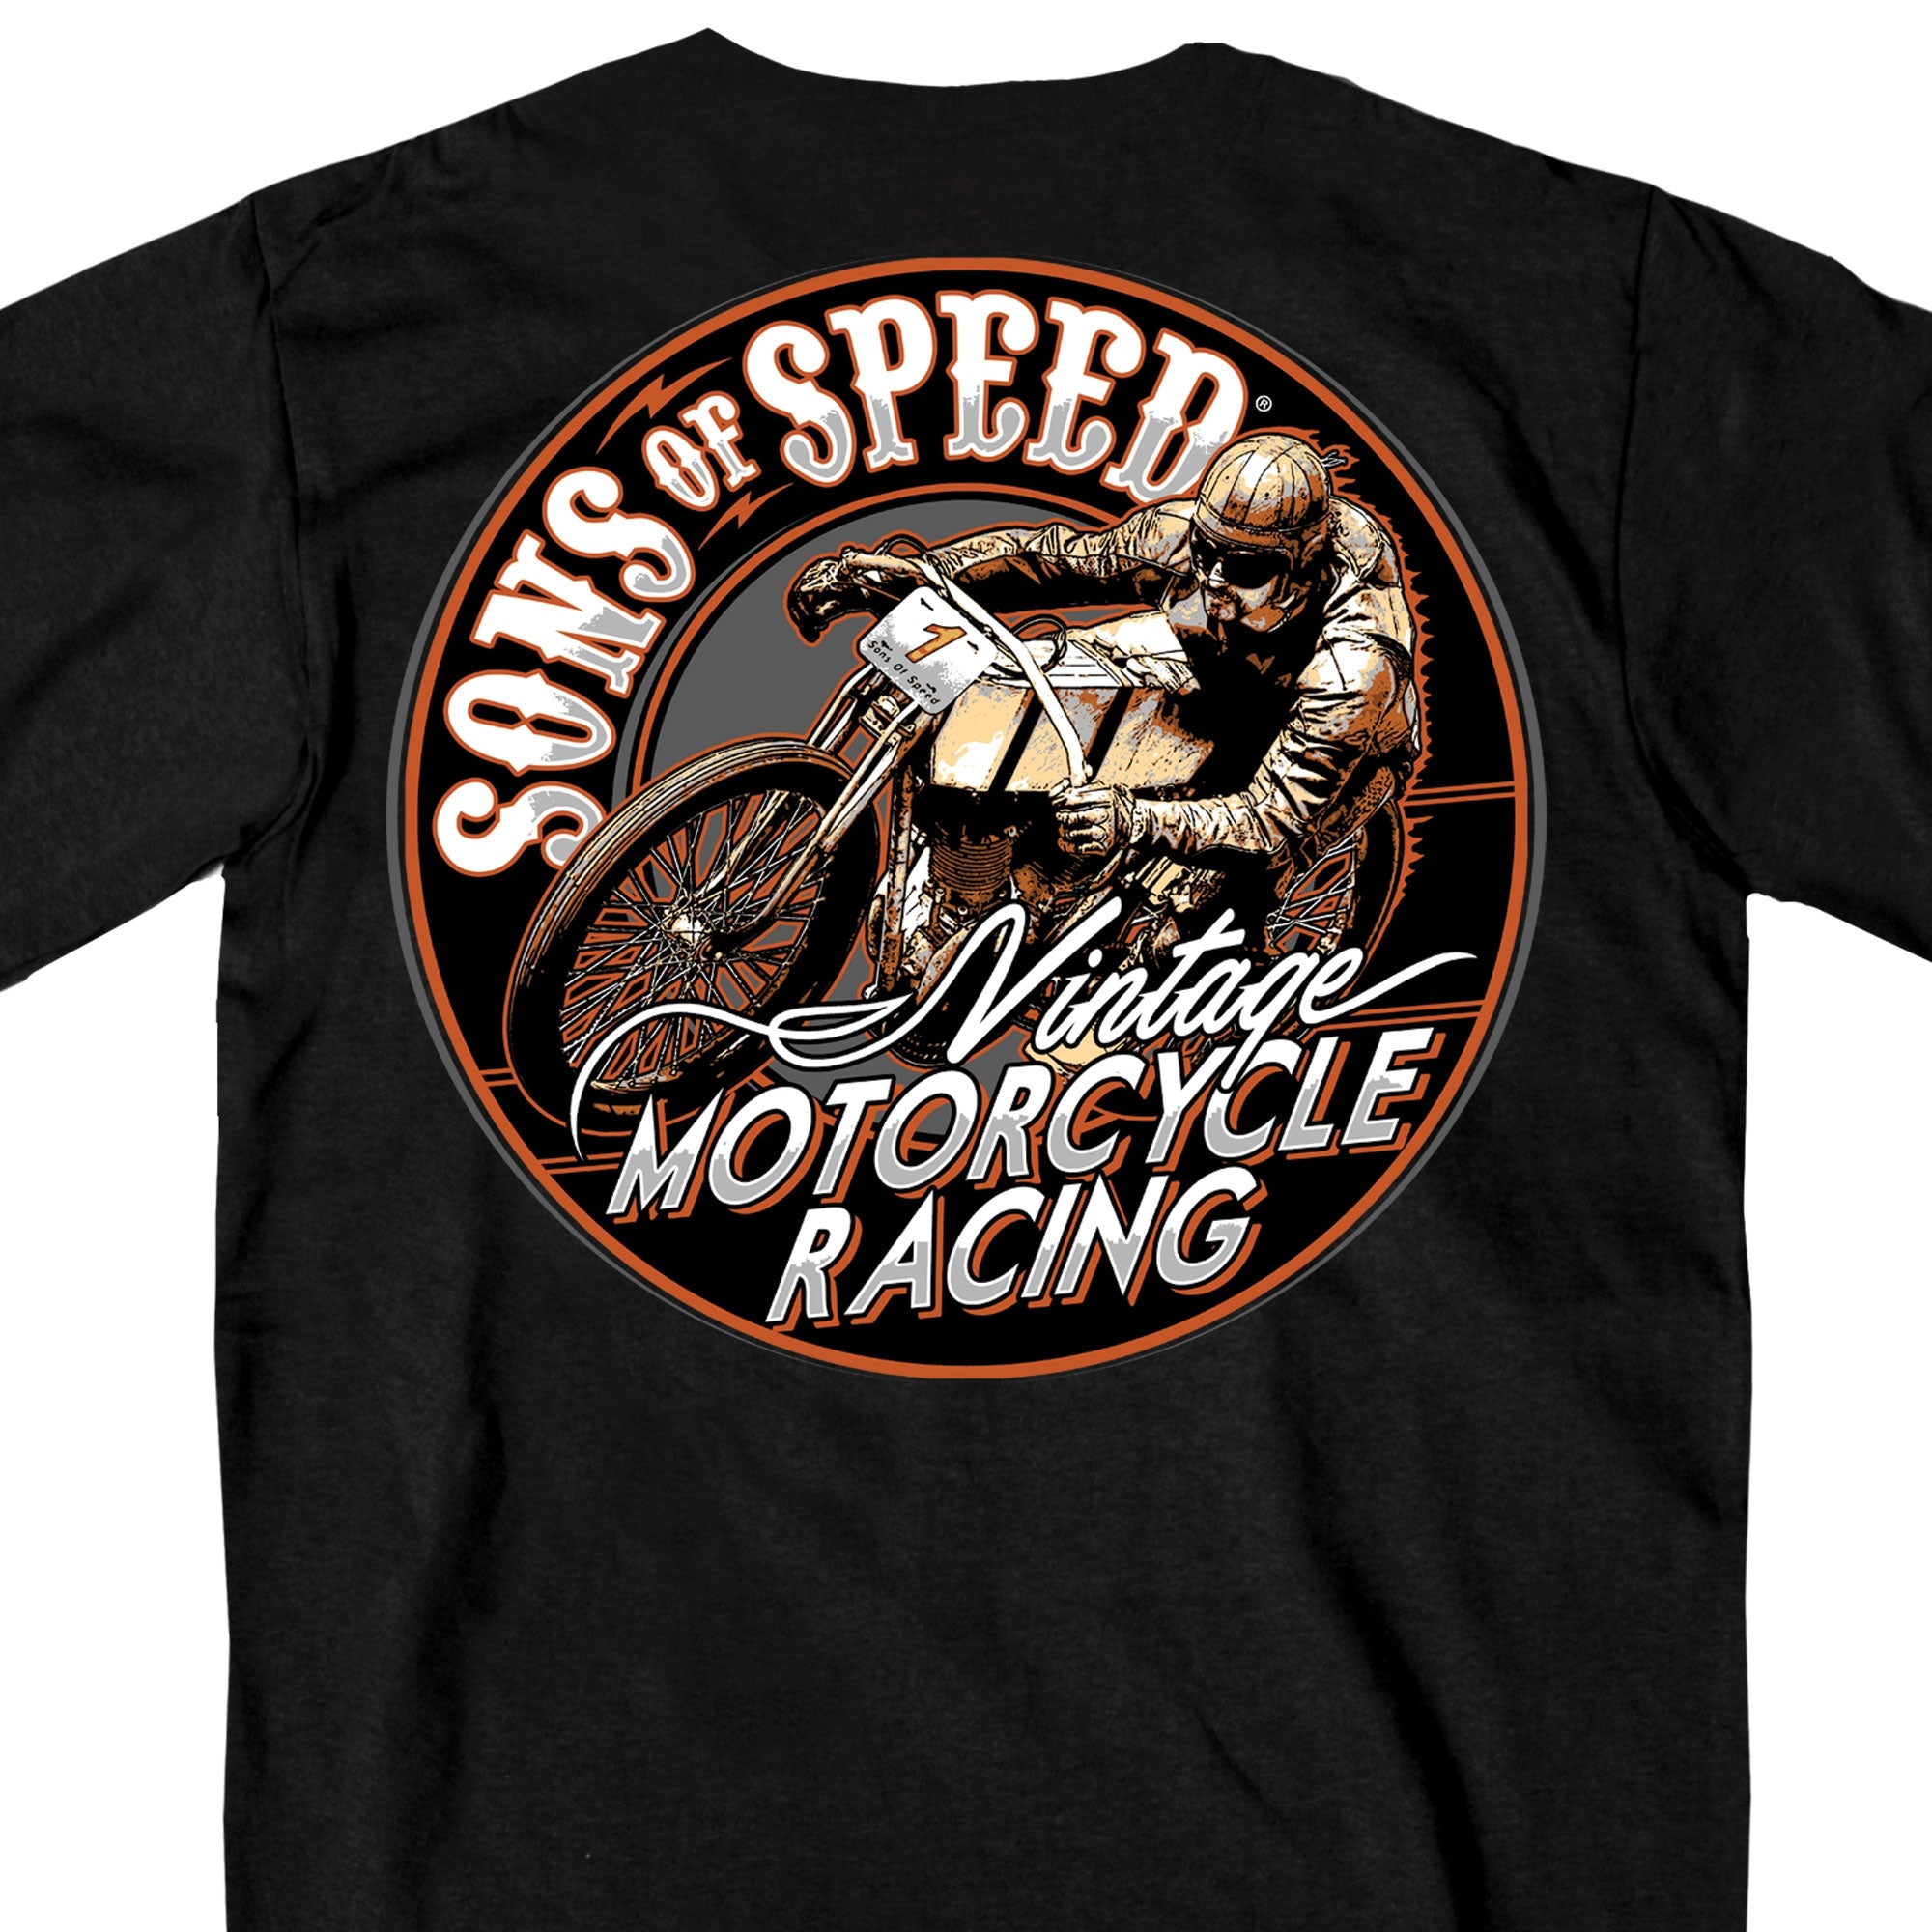 Official Sons of Speed Vintage Motorcycle Racing T-Shirt